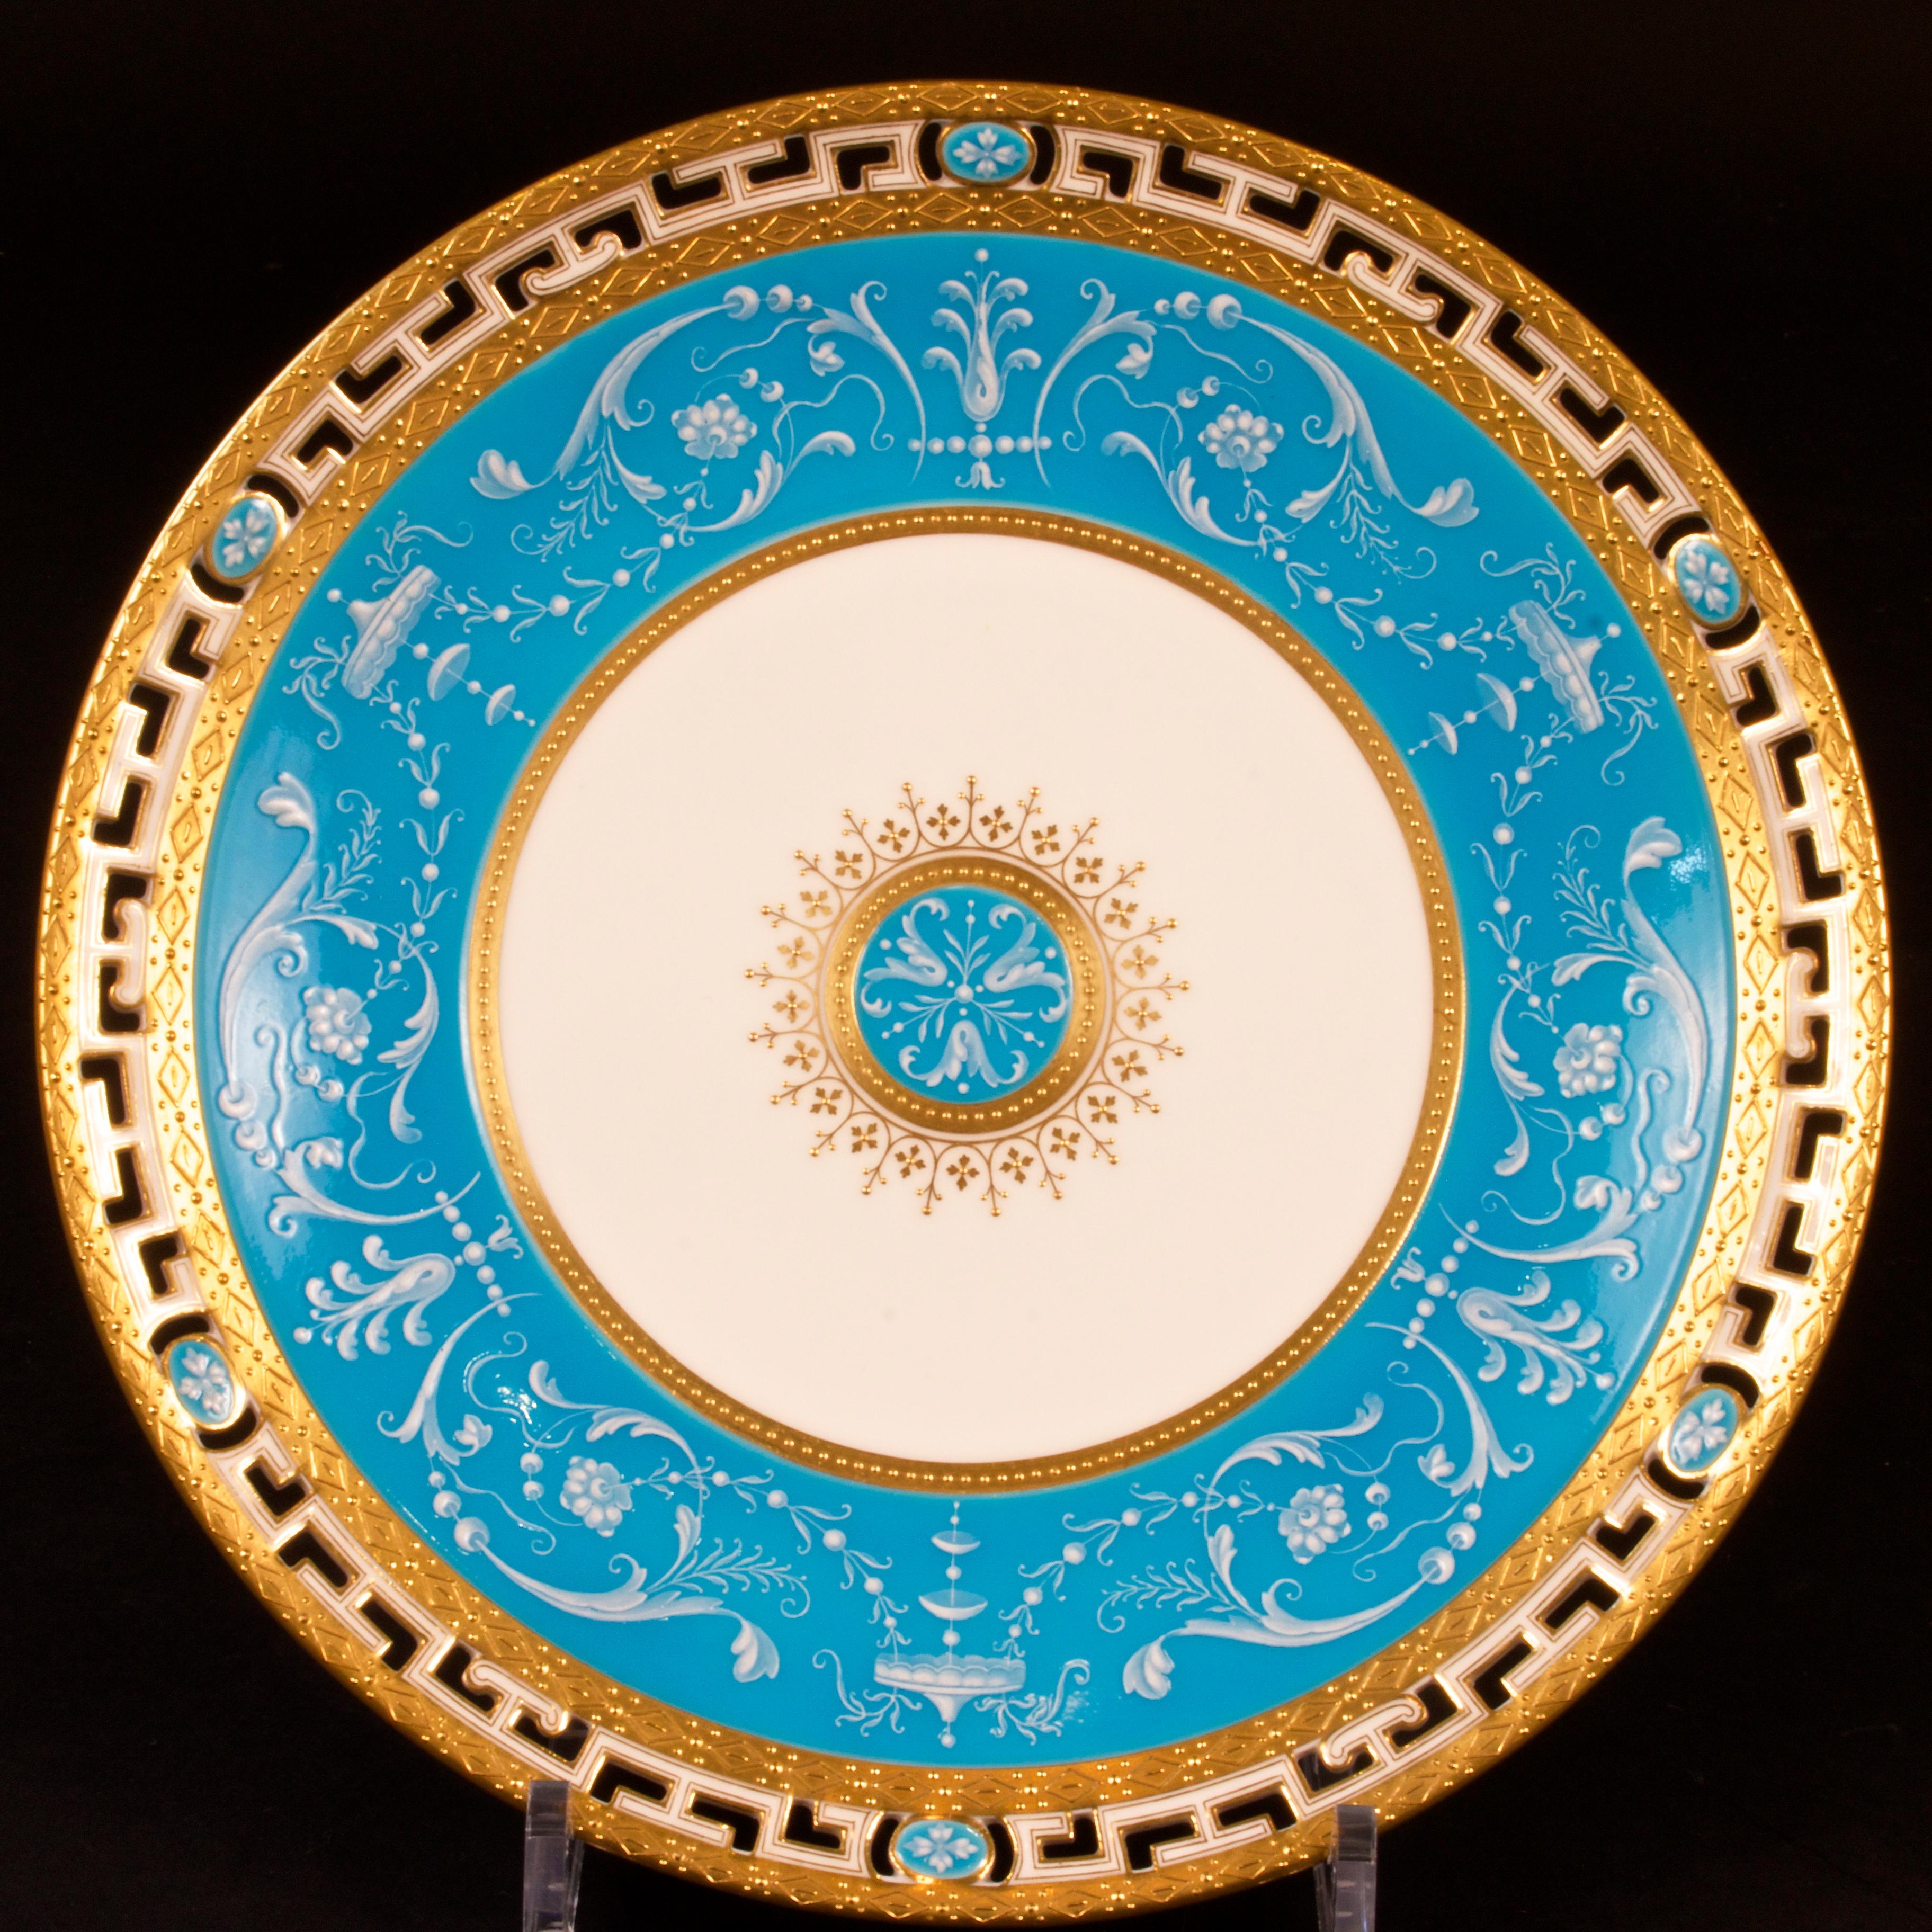 Here is an elegant set of gilded cabinet, service or dinner plates from Minton, Stoke-on-Trent, England. The plates are all decorated with Bleu Celeste or 